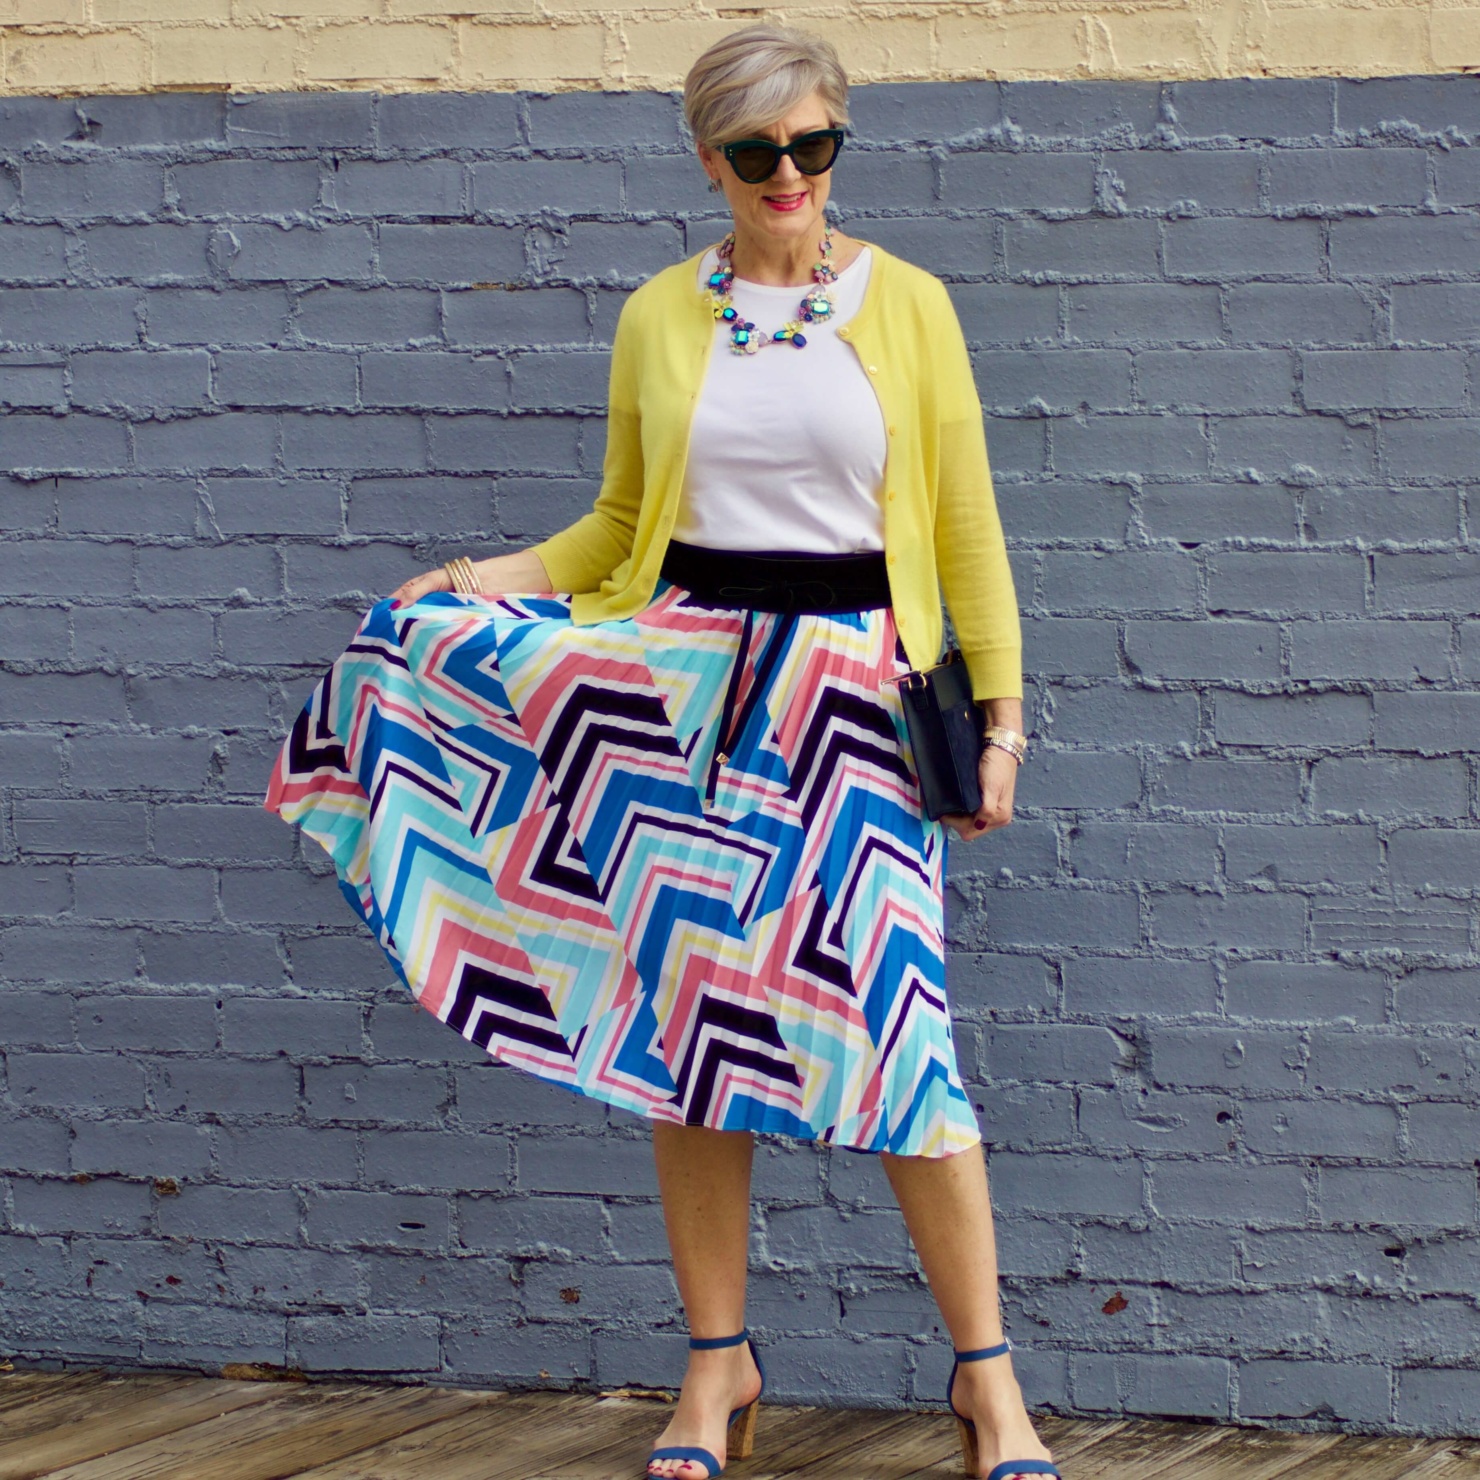 beth from Style at a Certain Age wears a midi skirt from J.C. Penney, white tee, and yellow cardigan